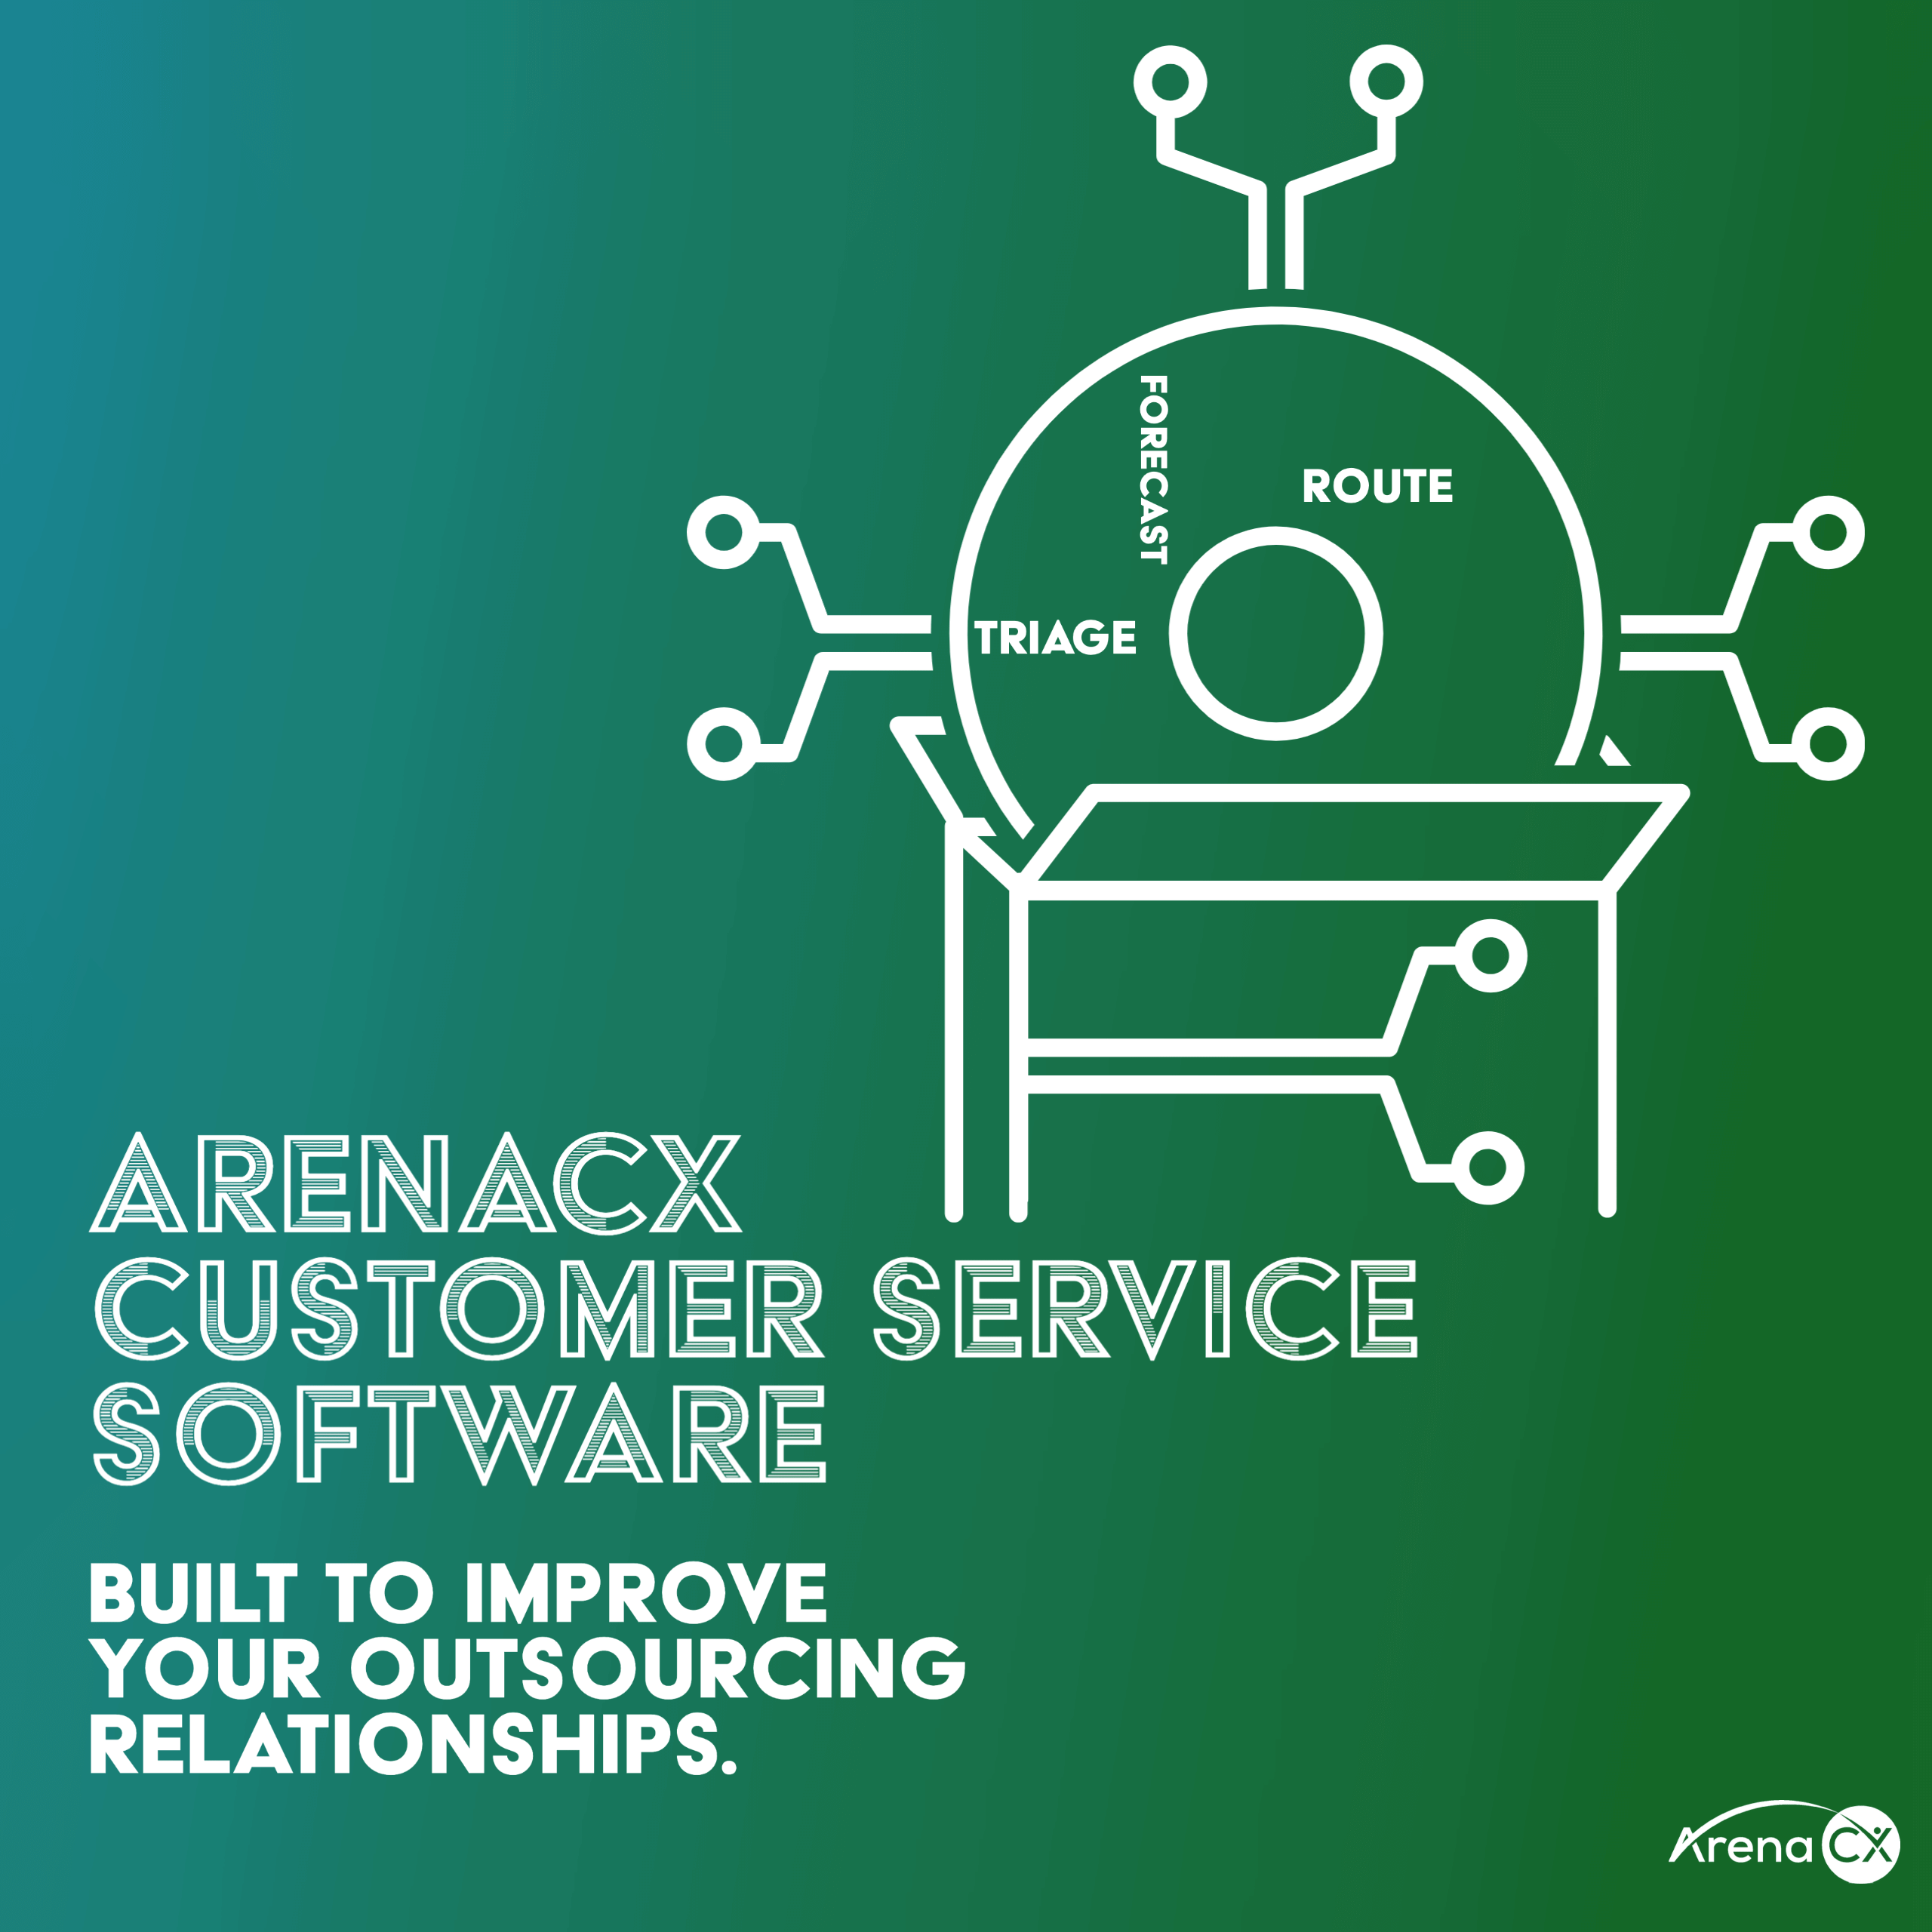 arenacx customer service software that improves customer service outsourcing relationships over a blue and green background with an illustration of puzzle pieces in a brain.